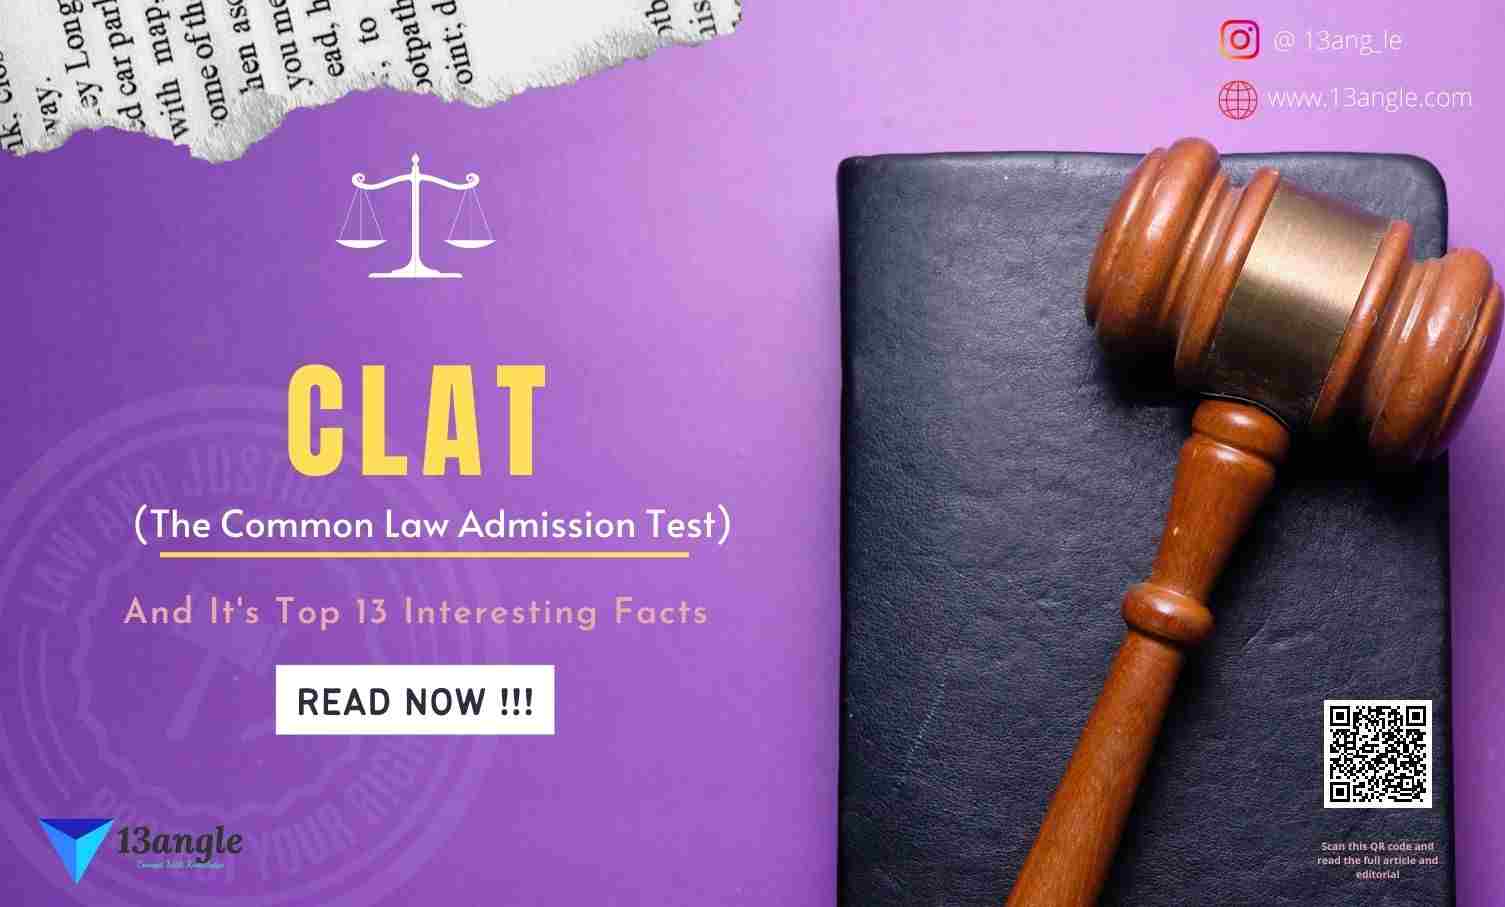 CLAT And It's Top 13 Interesting Facts- 13angle.com